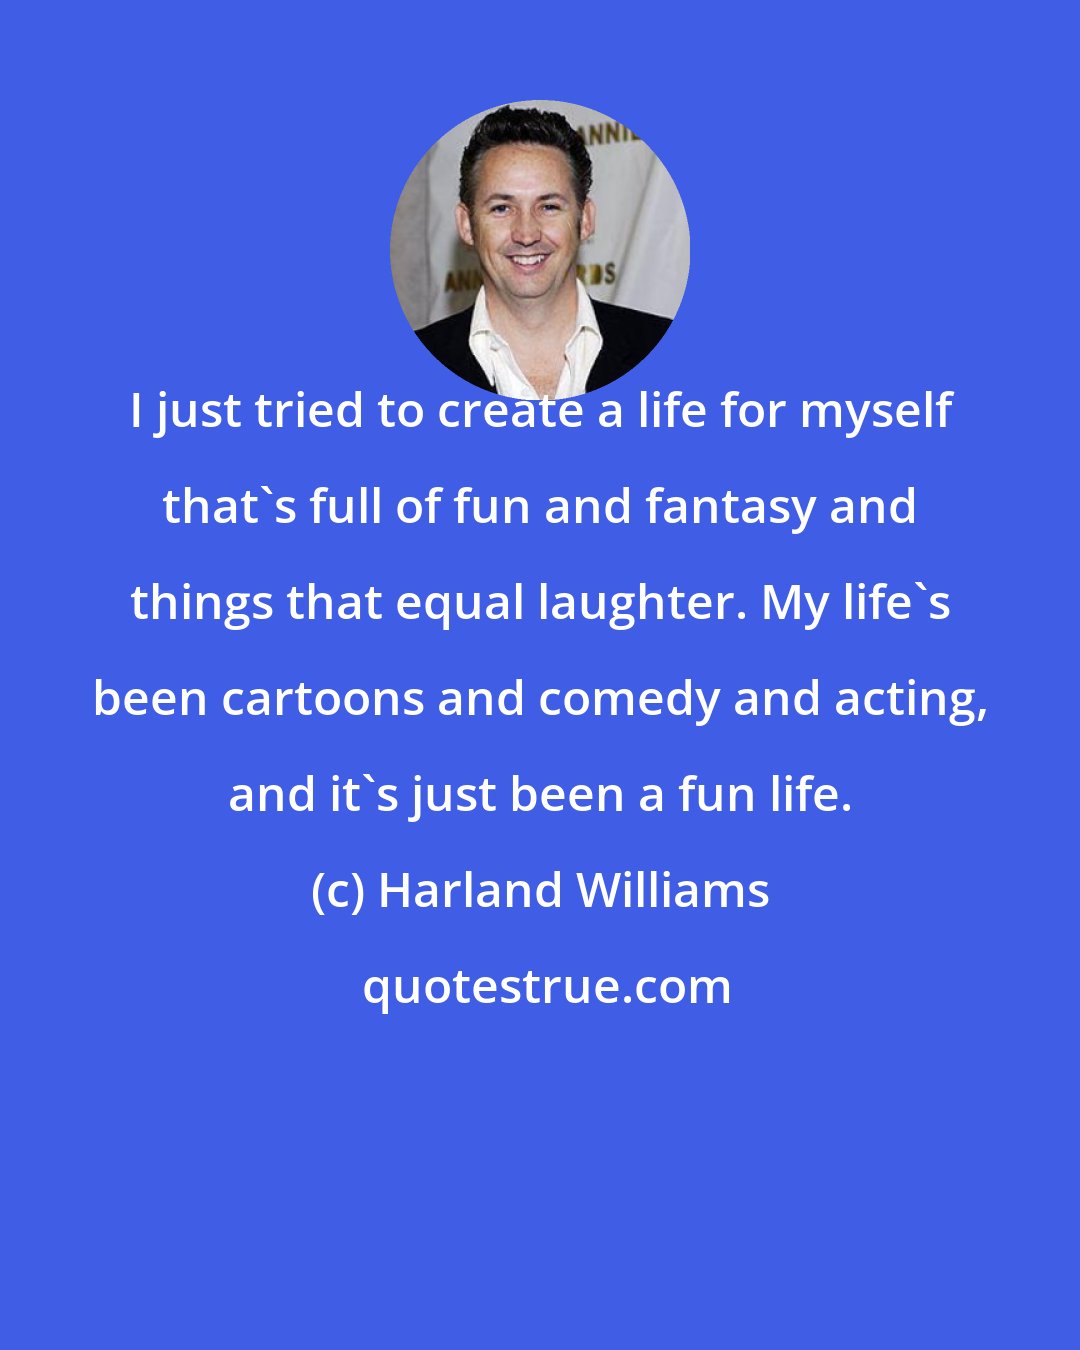 Harland Williams: I just tried to create a life for myself that's full of fun and fantasy and things that equal laughter. My life's been cartoons and comedy and acting, and it's just been a fun life.